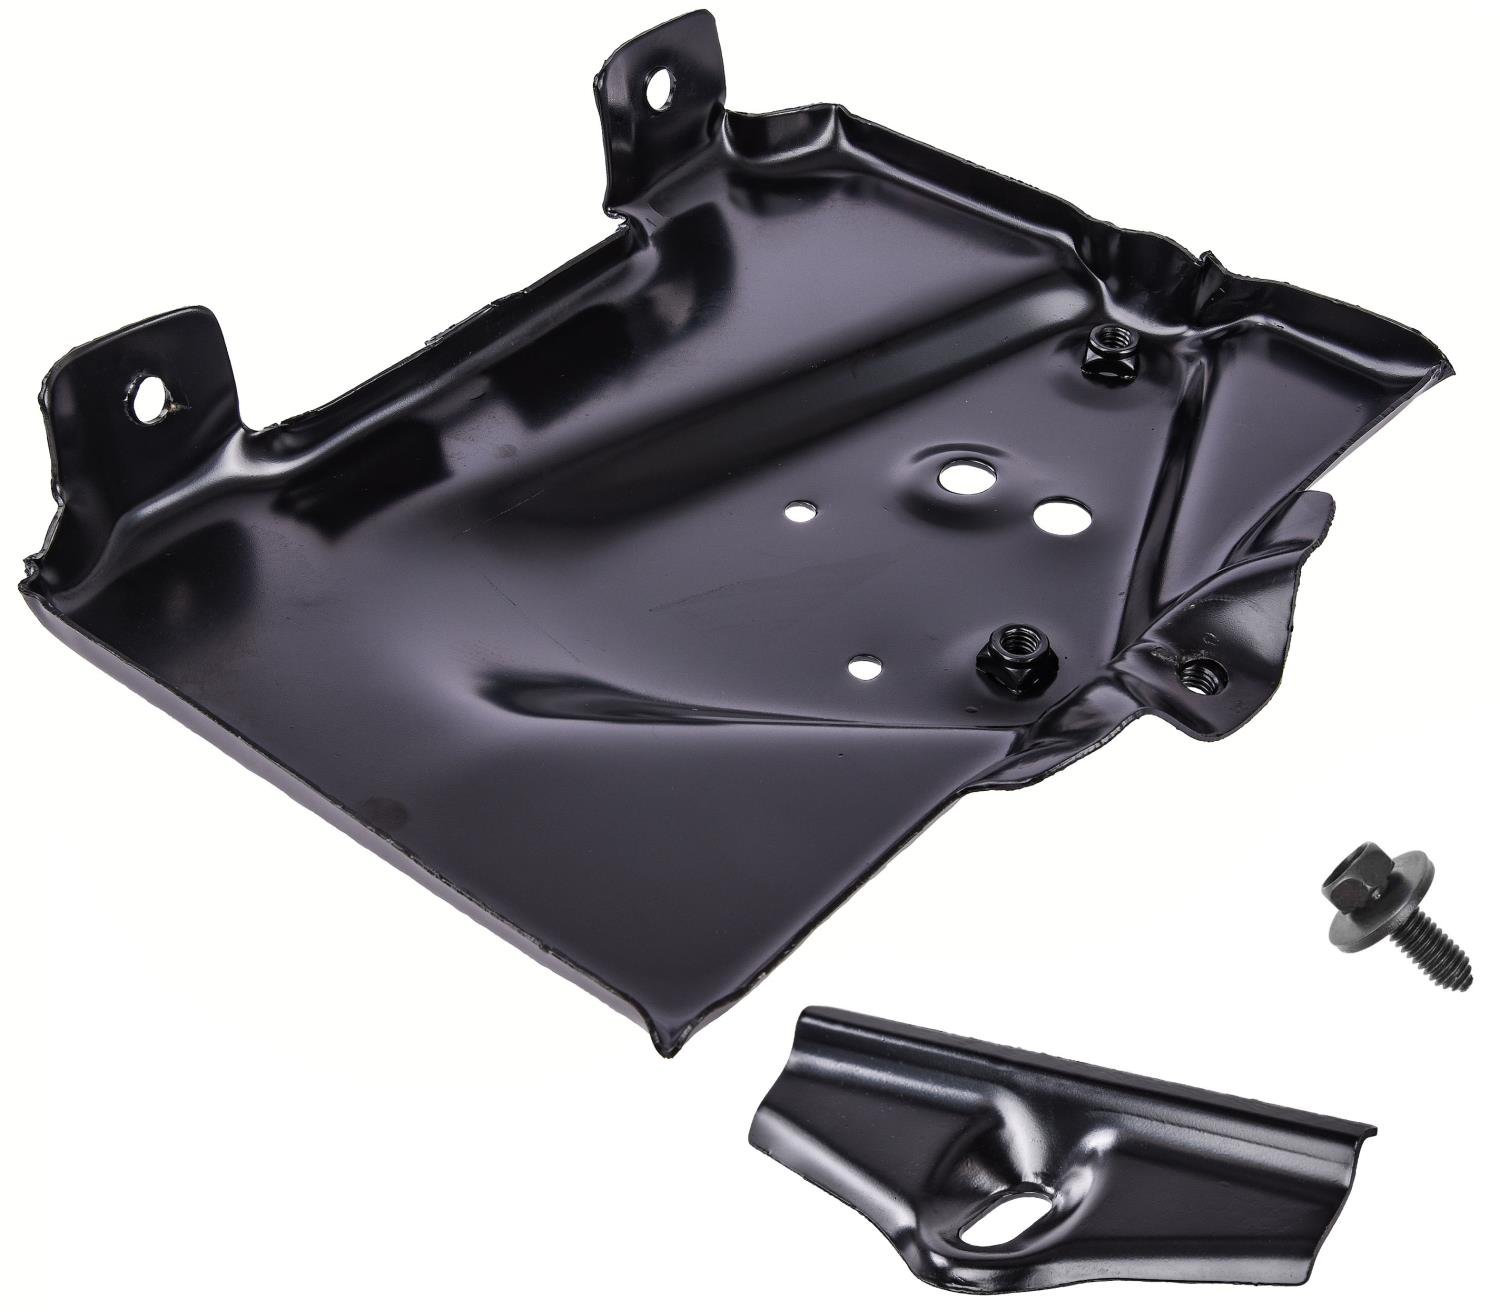 Battery Tray Kit for 1966 Chevy Biscayne, Chevelle, Impala and 1967-1969 Chevy Camaro, Pontiac Firebird